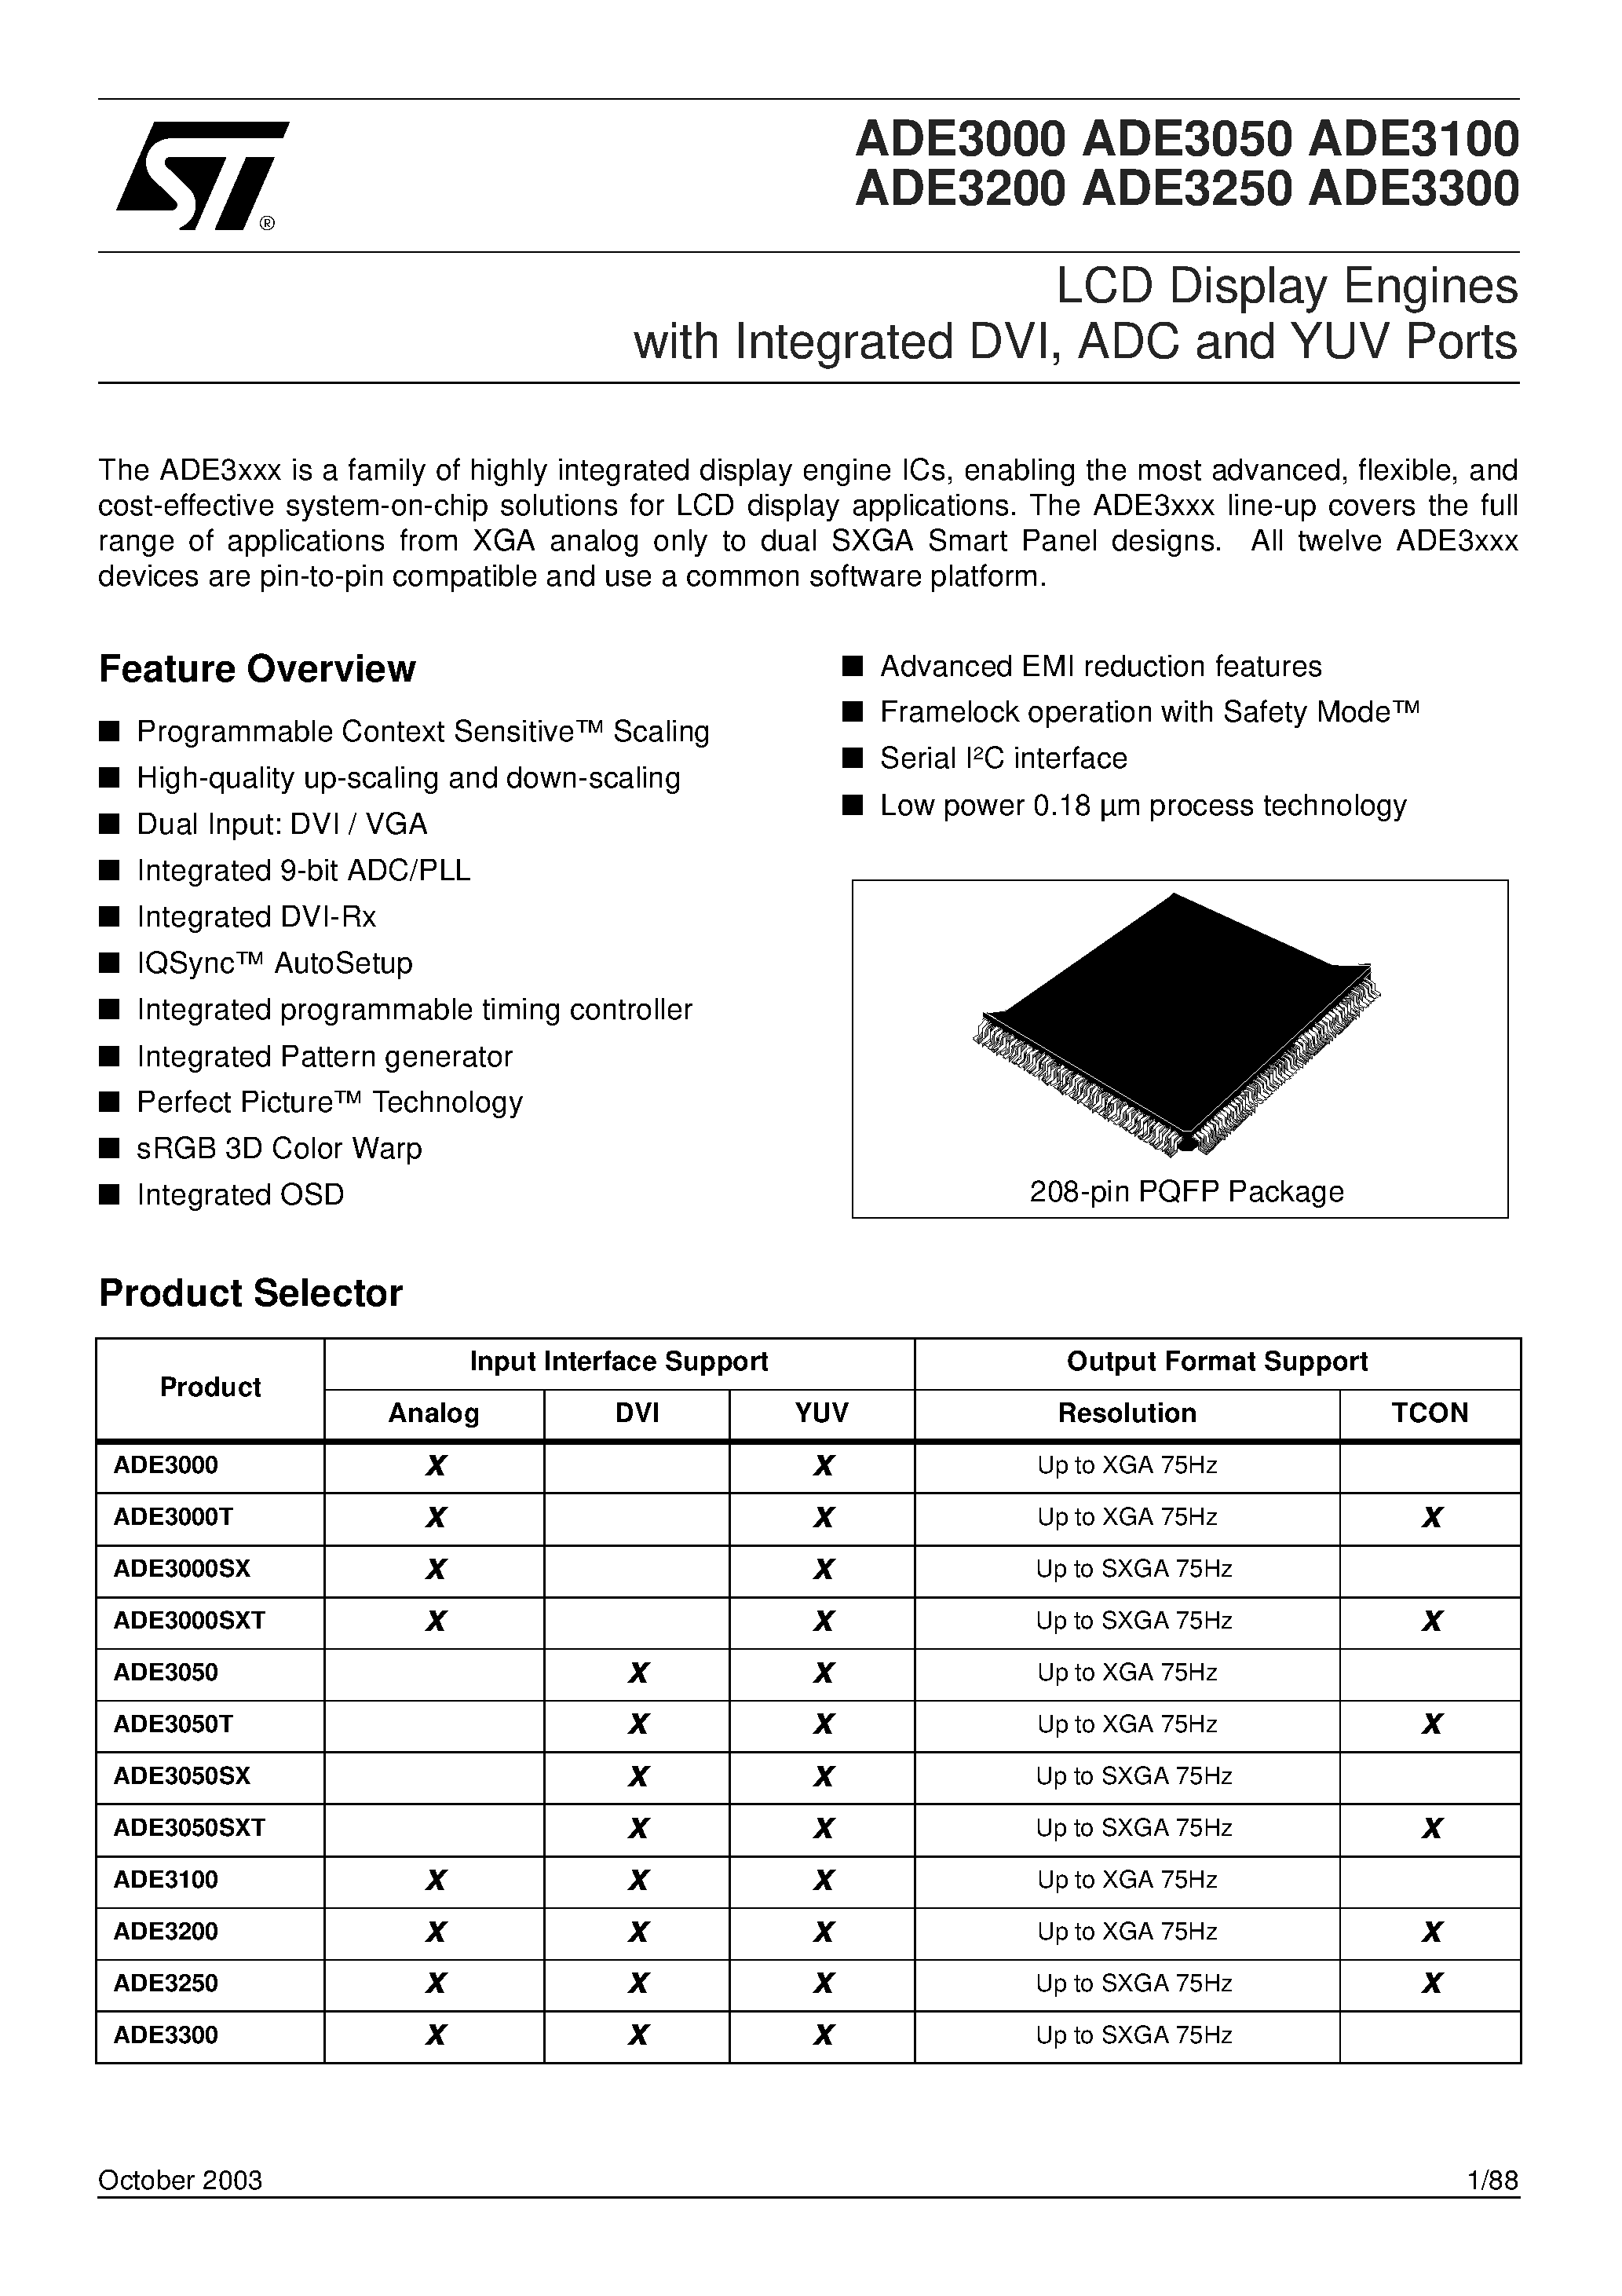 Datasheet ADE3050T - LCD Display Engines with Integrated DVI/ ADC and YUV Ports page 1